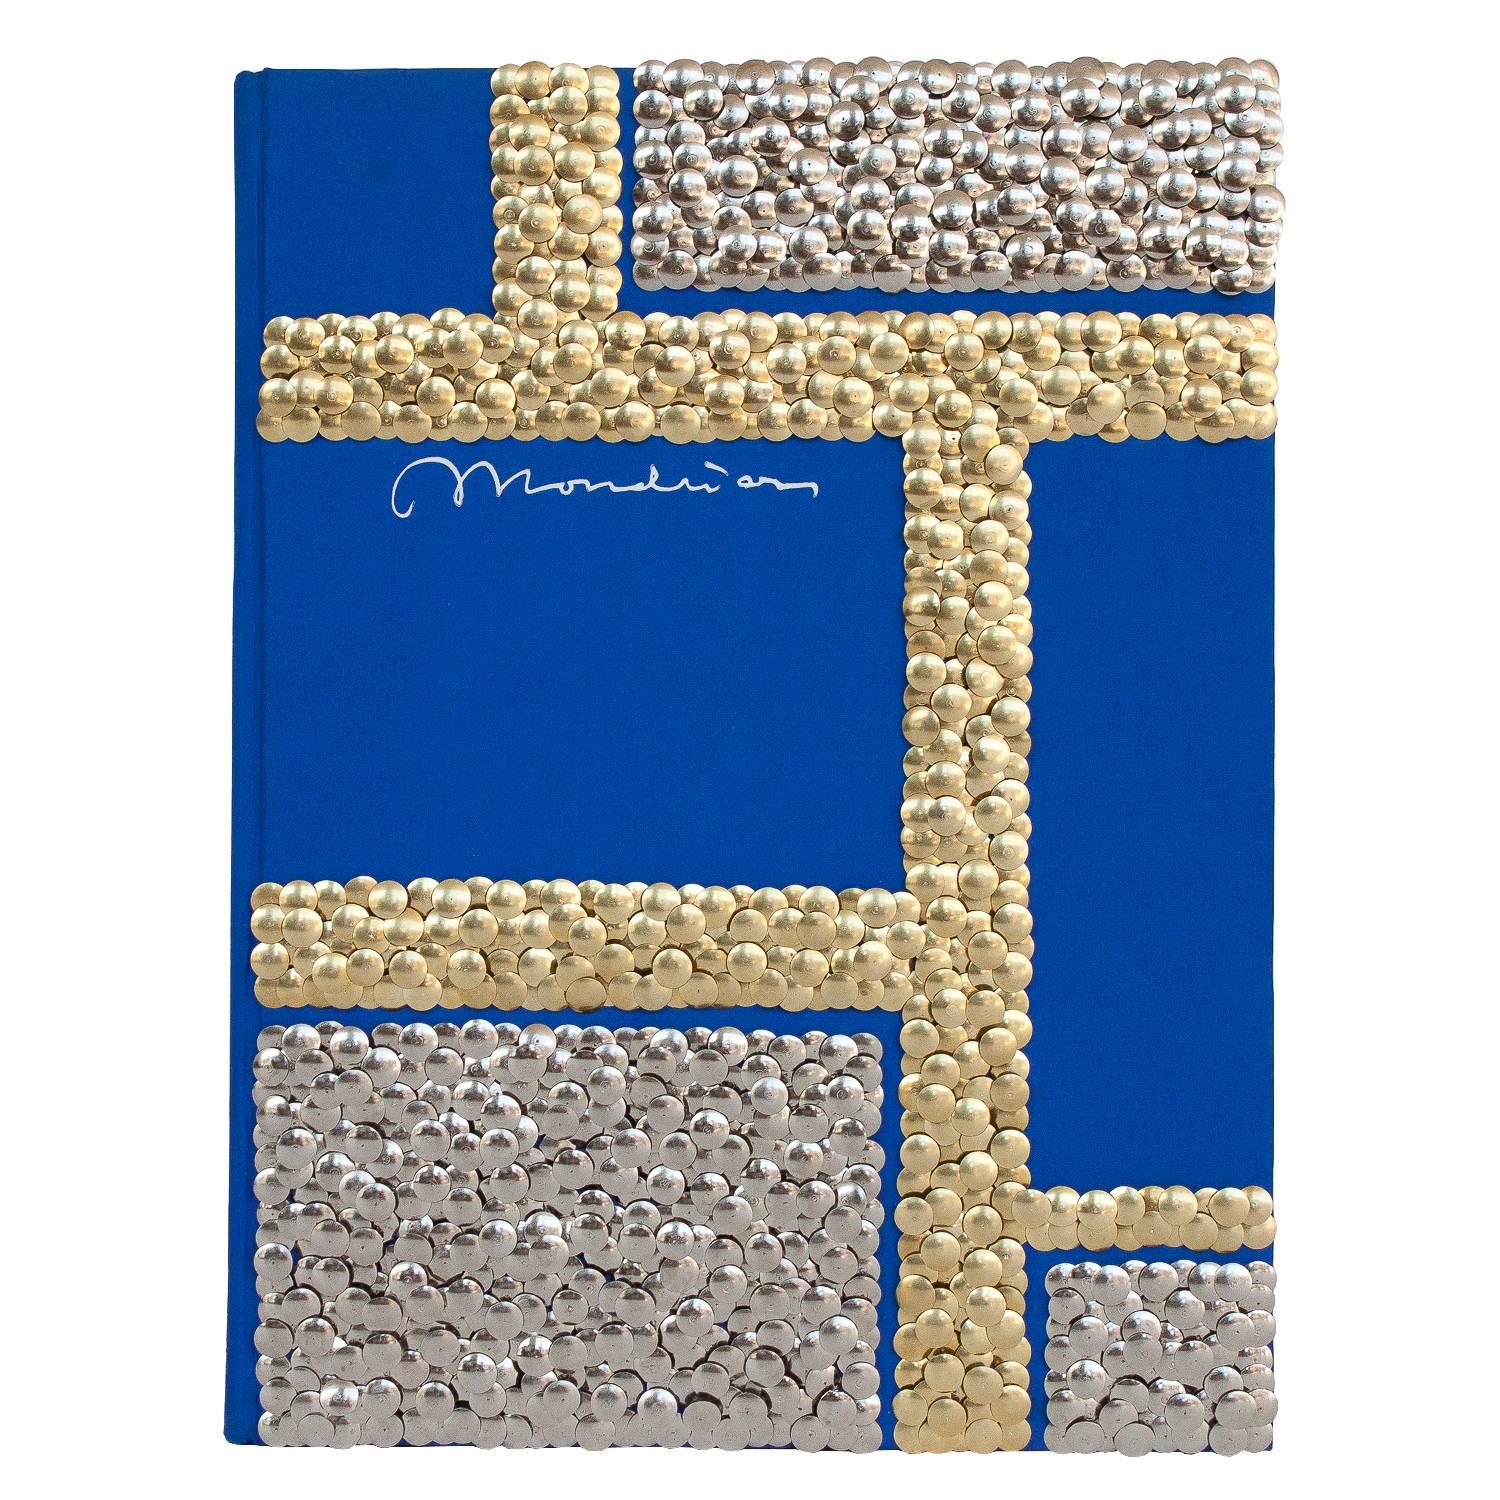 “Silver and Brass Adorned Mondrian” Book by Brian Stanziale